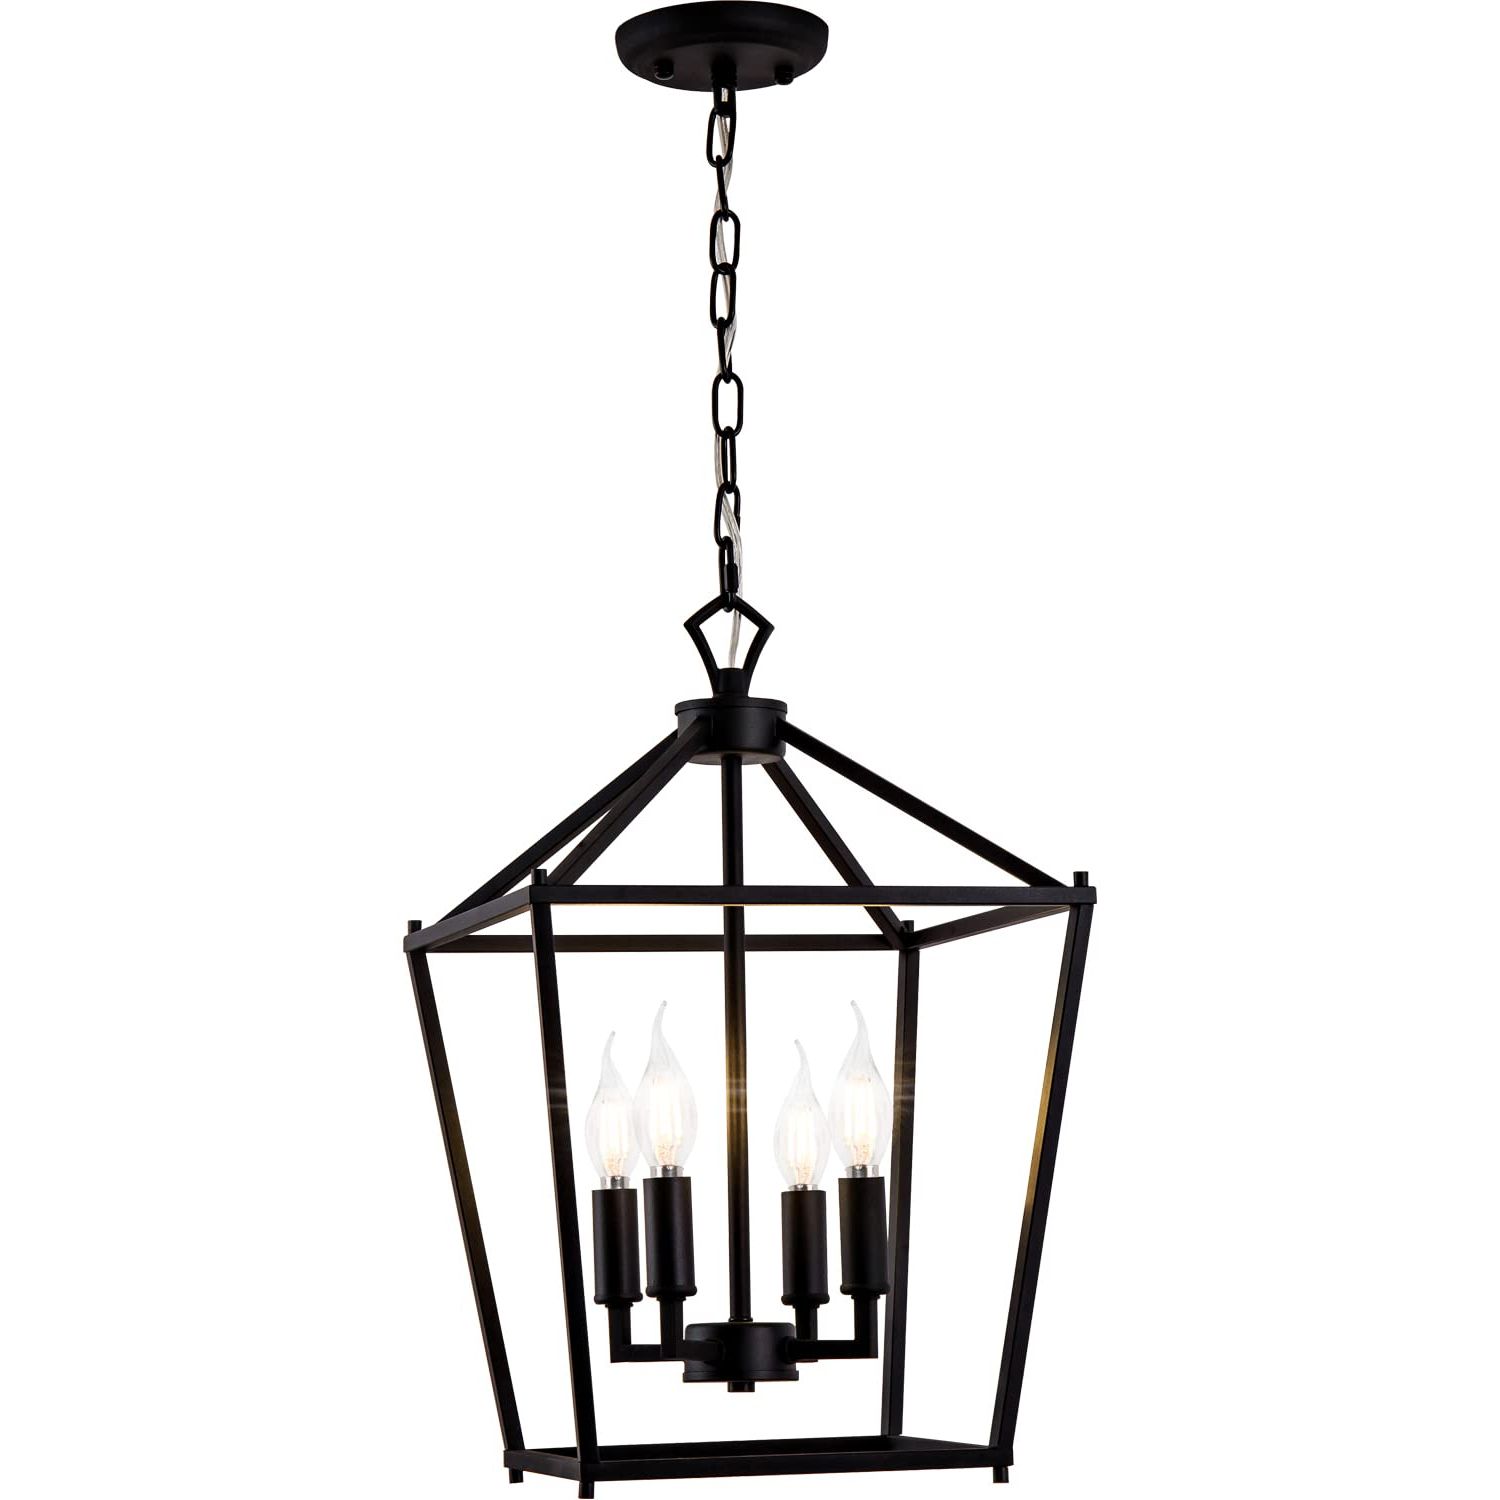 Blackened Iron Lantern Chandeliers For Current Vikaey Industrial Farmhouse Chandelier, Metal Lantern Pendant Lighting,  Hanging Lighting Fixture Square Cage For Hallway, Entryway, Living Room,  Bedroom, Dinning Room, Kitchen Island, Black – – Amazon (View 9 of 10)